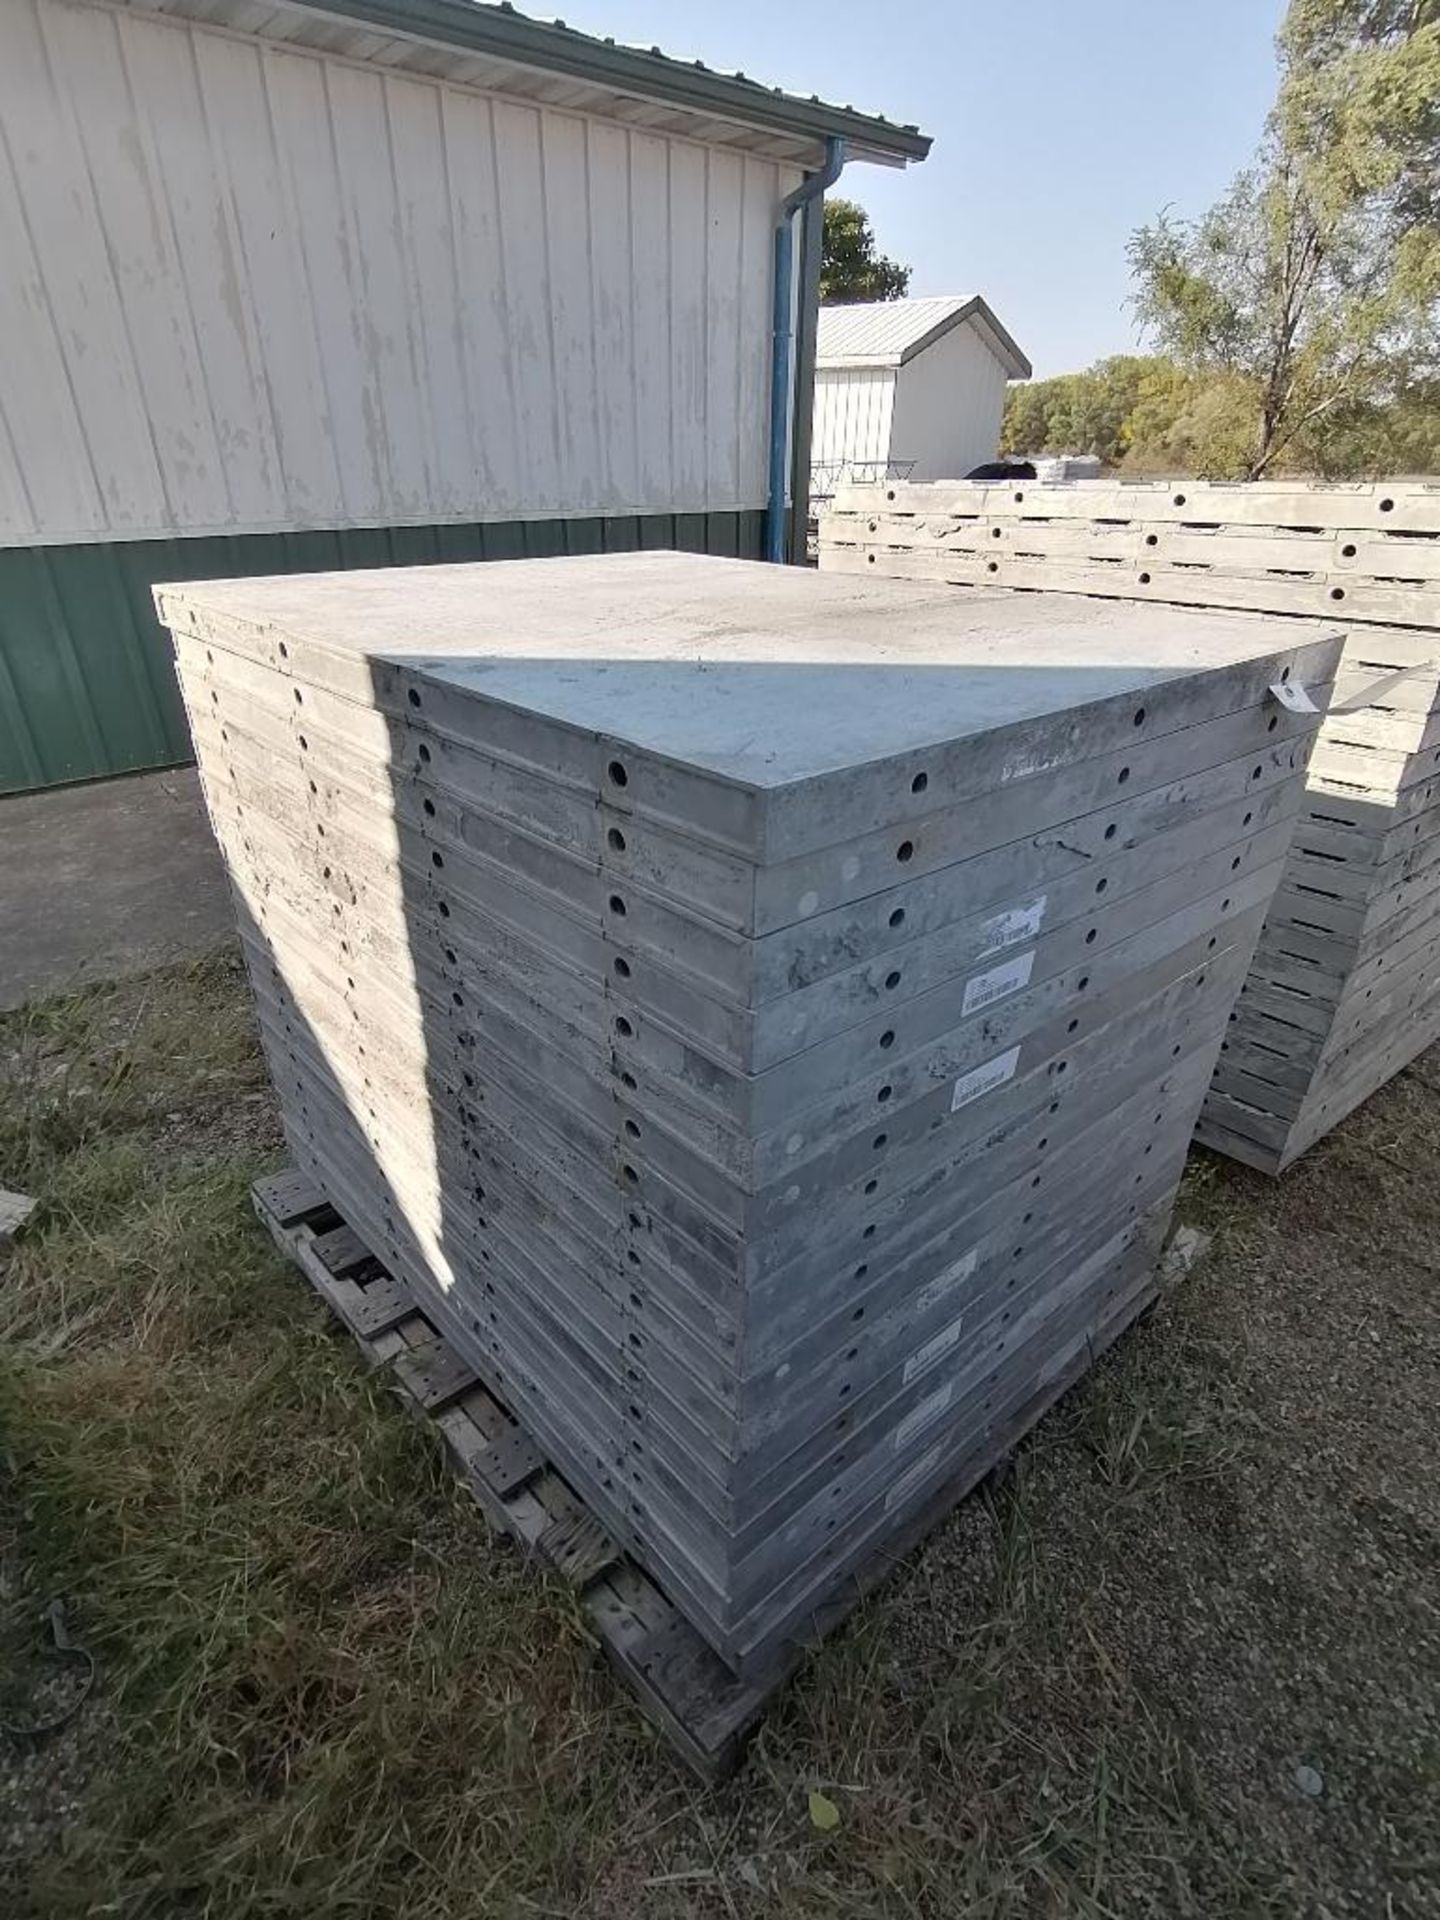 (19) 36" x 4' Precise Smooth Aluminum Concrete Forms, 6-12 Hole Pattern. Located in Woodbine, IA